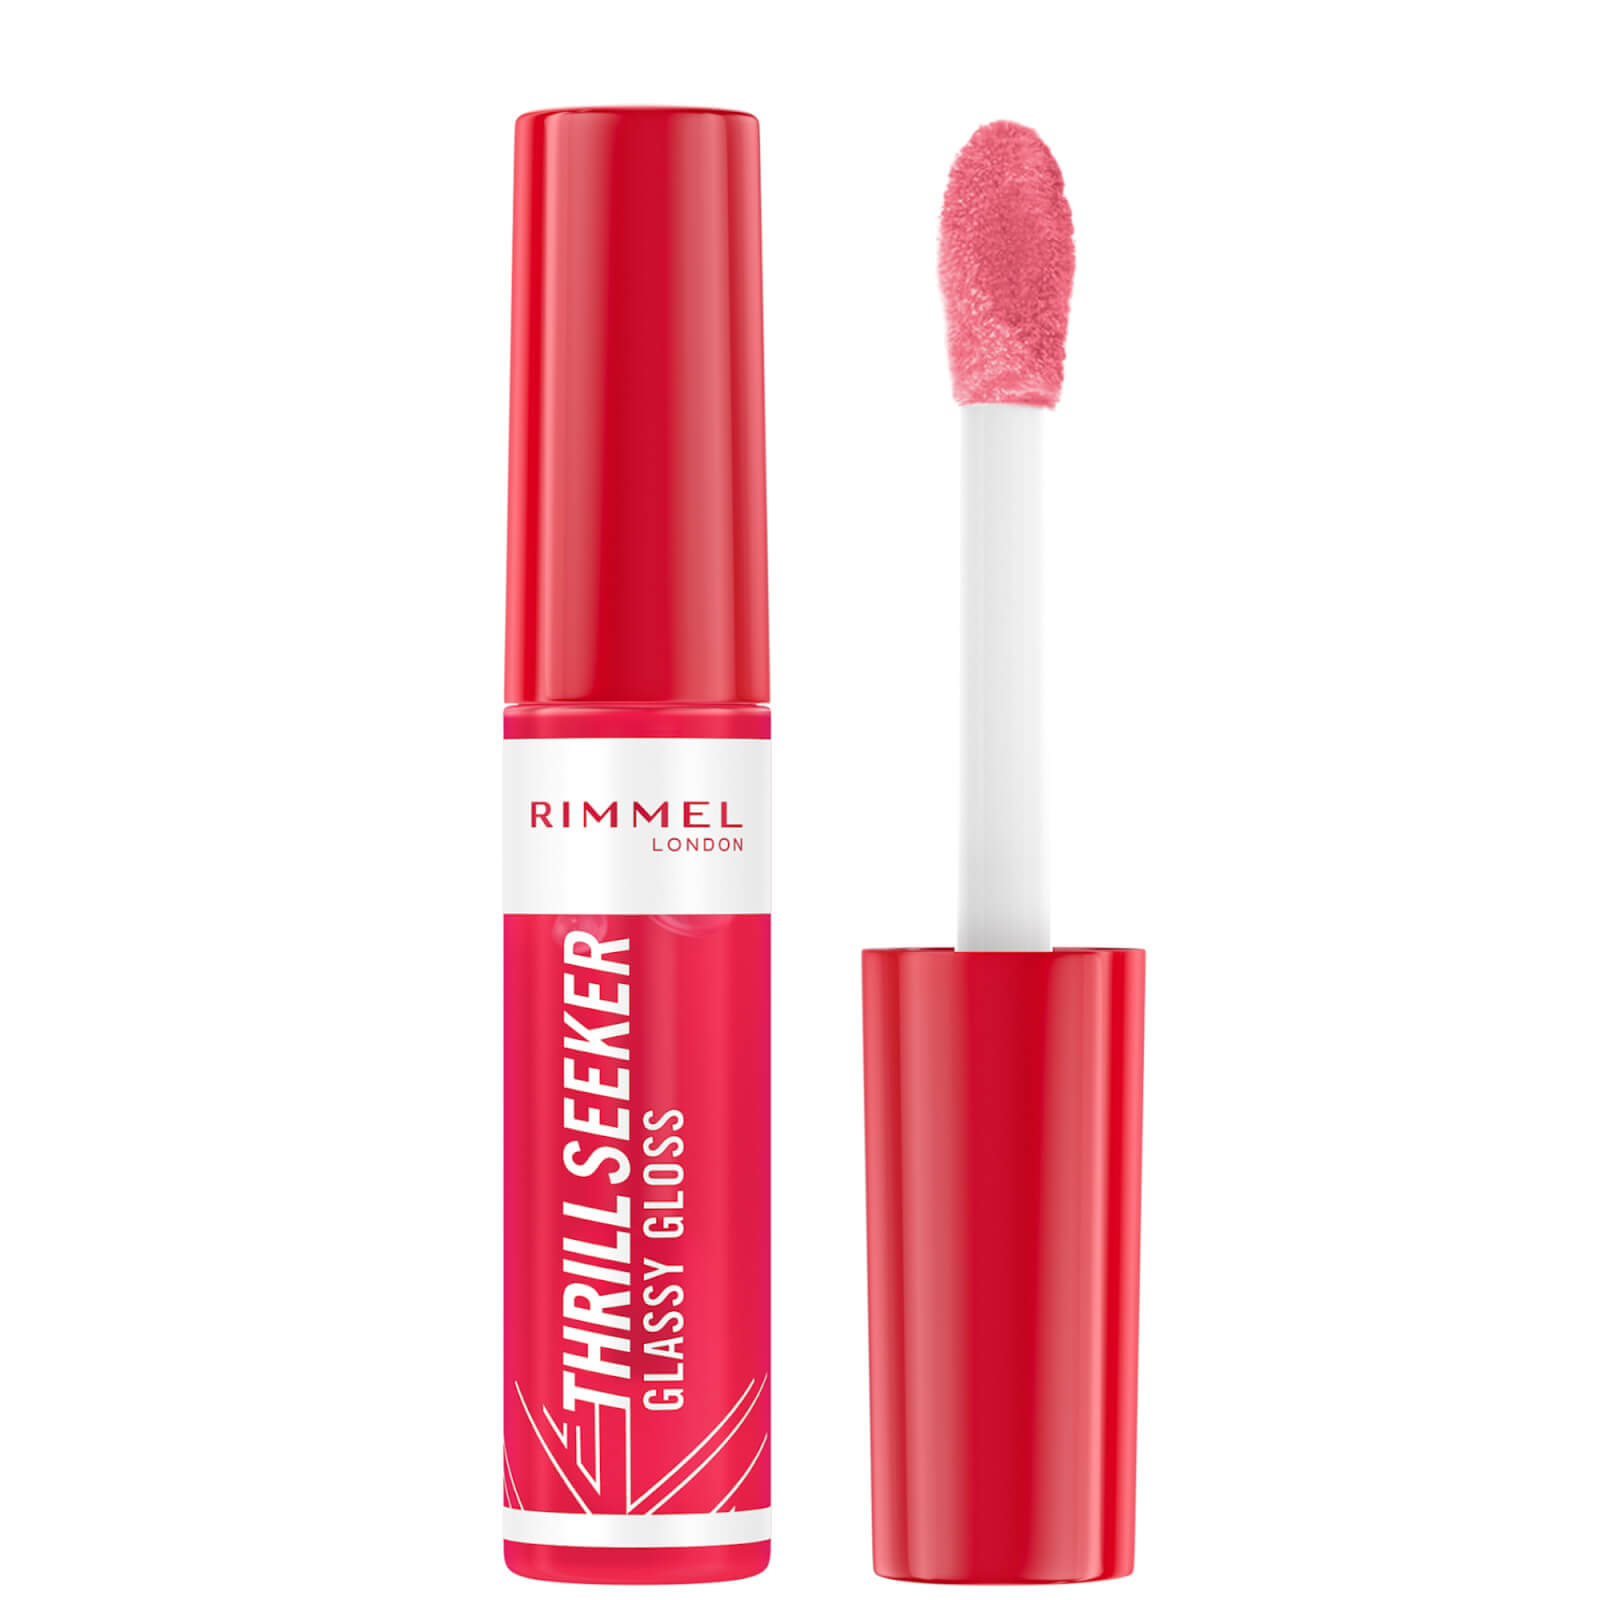 Image of Rimmel London Thrill Seeker Glassy Lip Gloss 10ml (Various Shades) - 600 Berry Glace